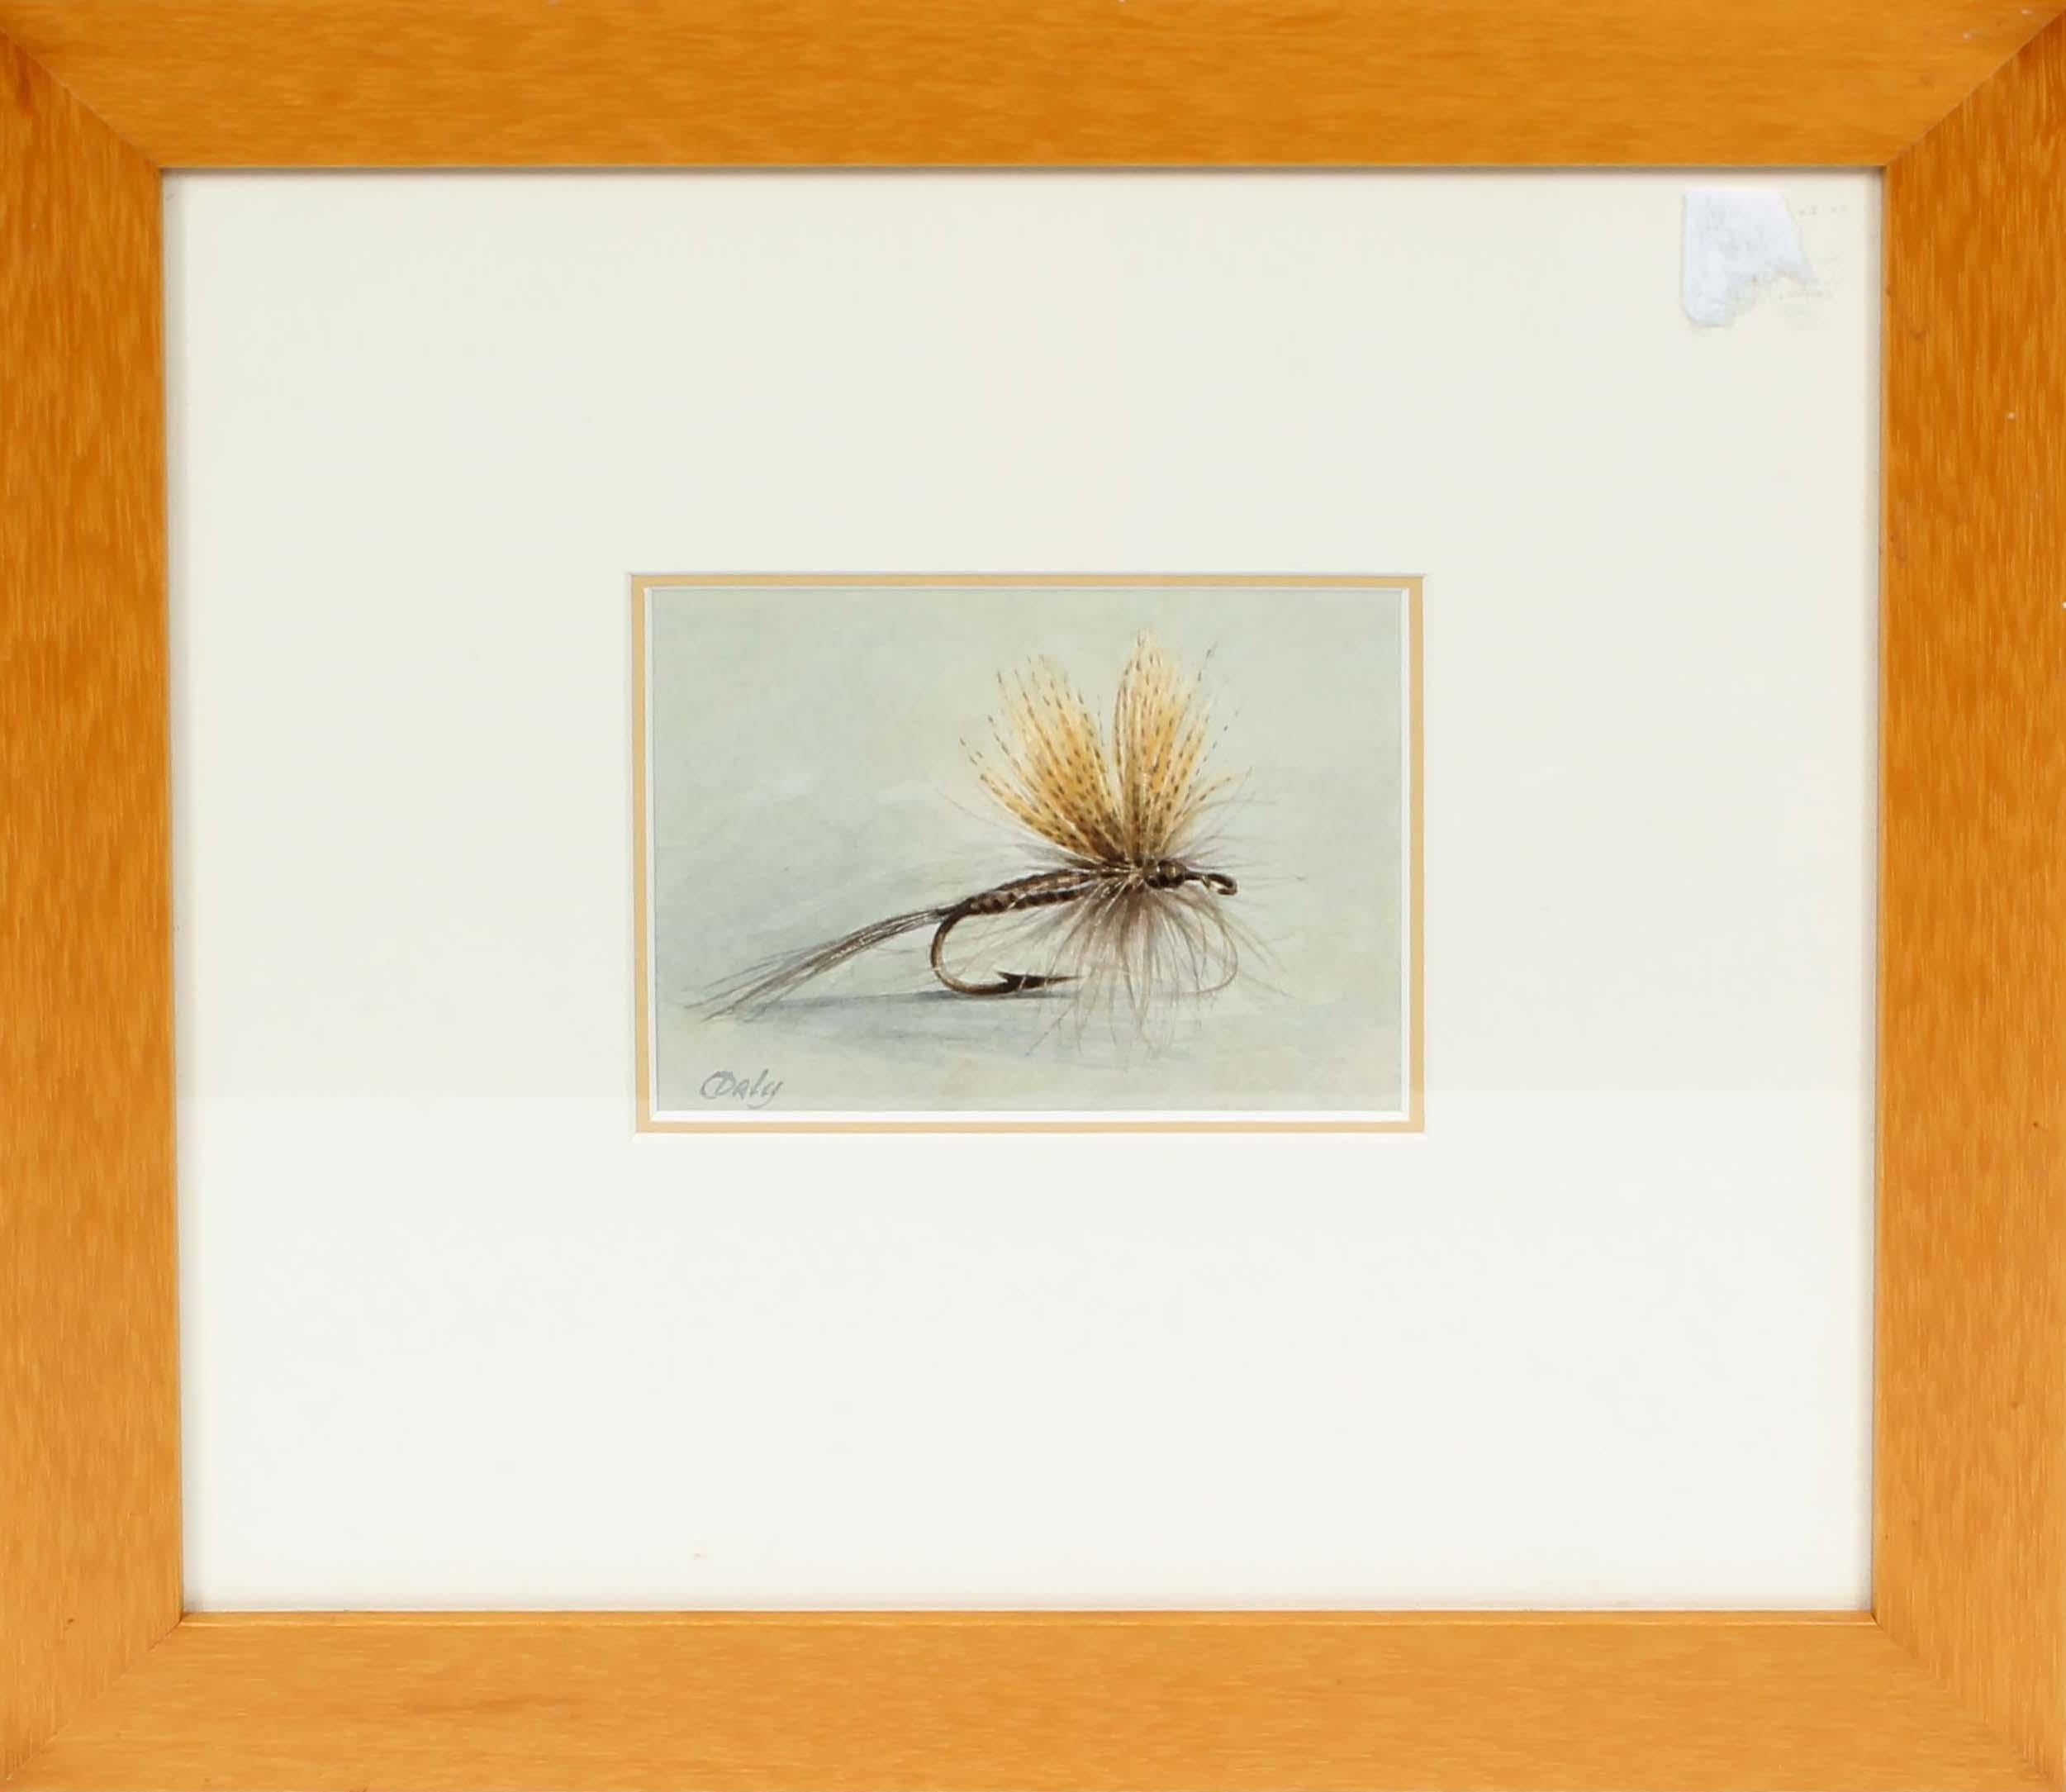 An original watercolor by American artist Thomas Aquinas Daly.

This work comes housed in an archival frame presentation.